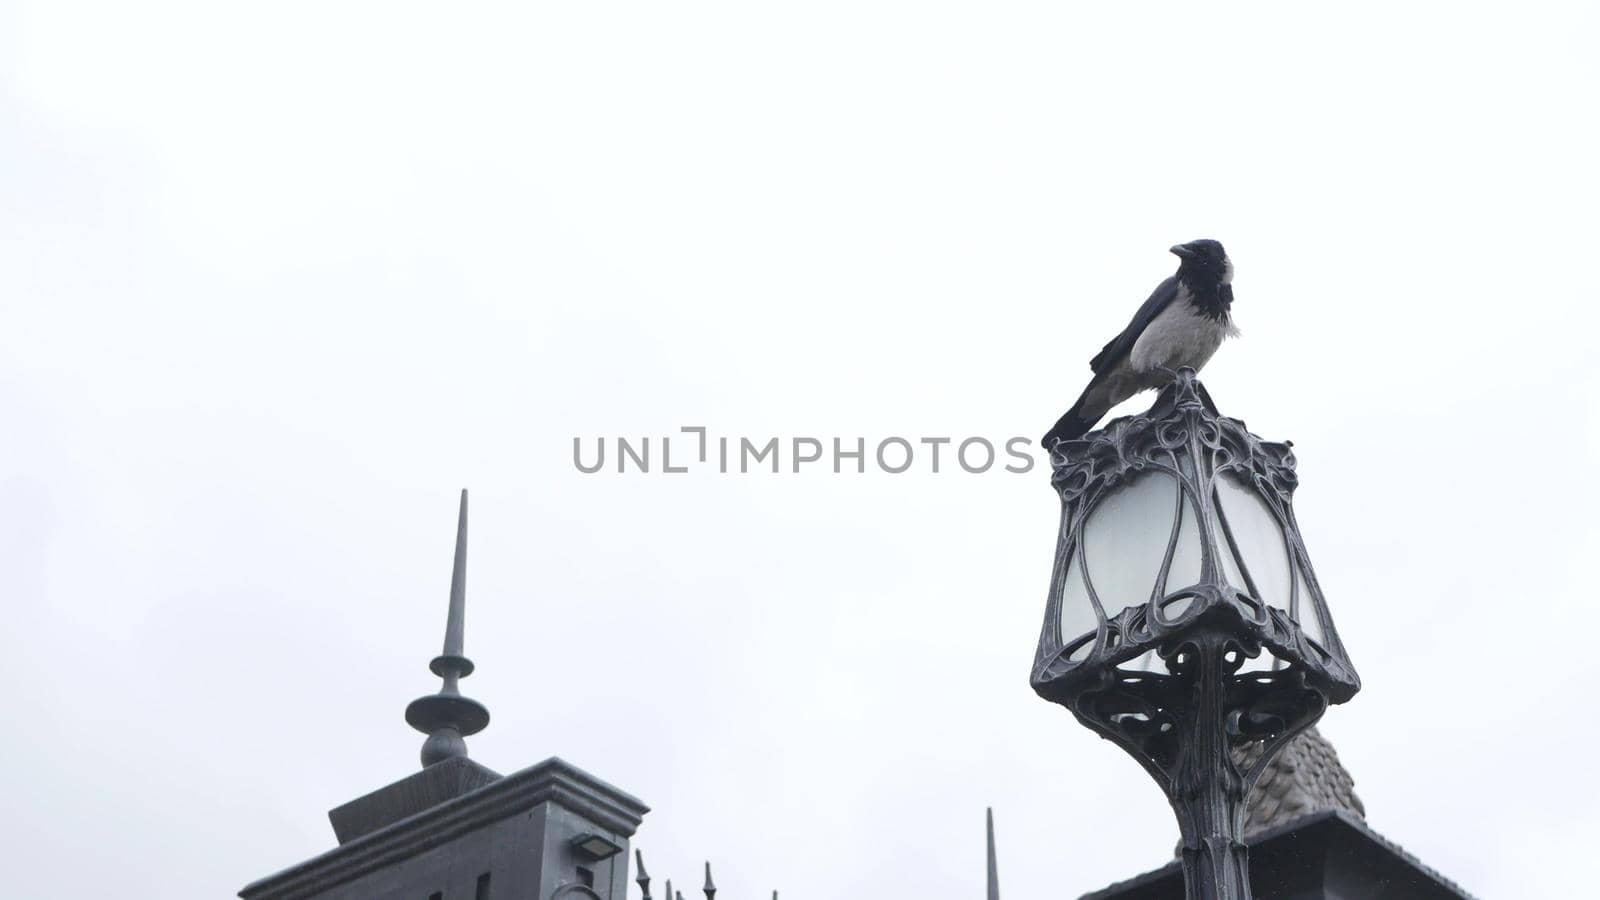 Gothic black raven bird on forged metallic lantern, dramatic dark crow in castle. Corvus in gloomy mystic melancholic atmosphere of autumn or fall. Moody symbol of evil and death. Halloween concept.